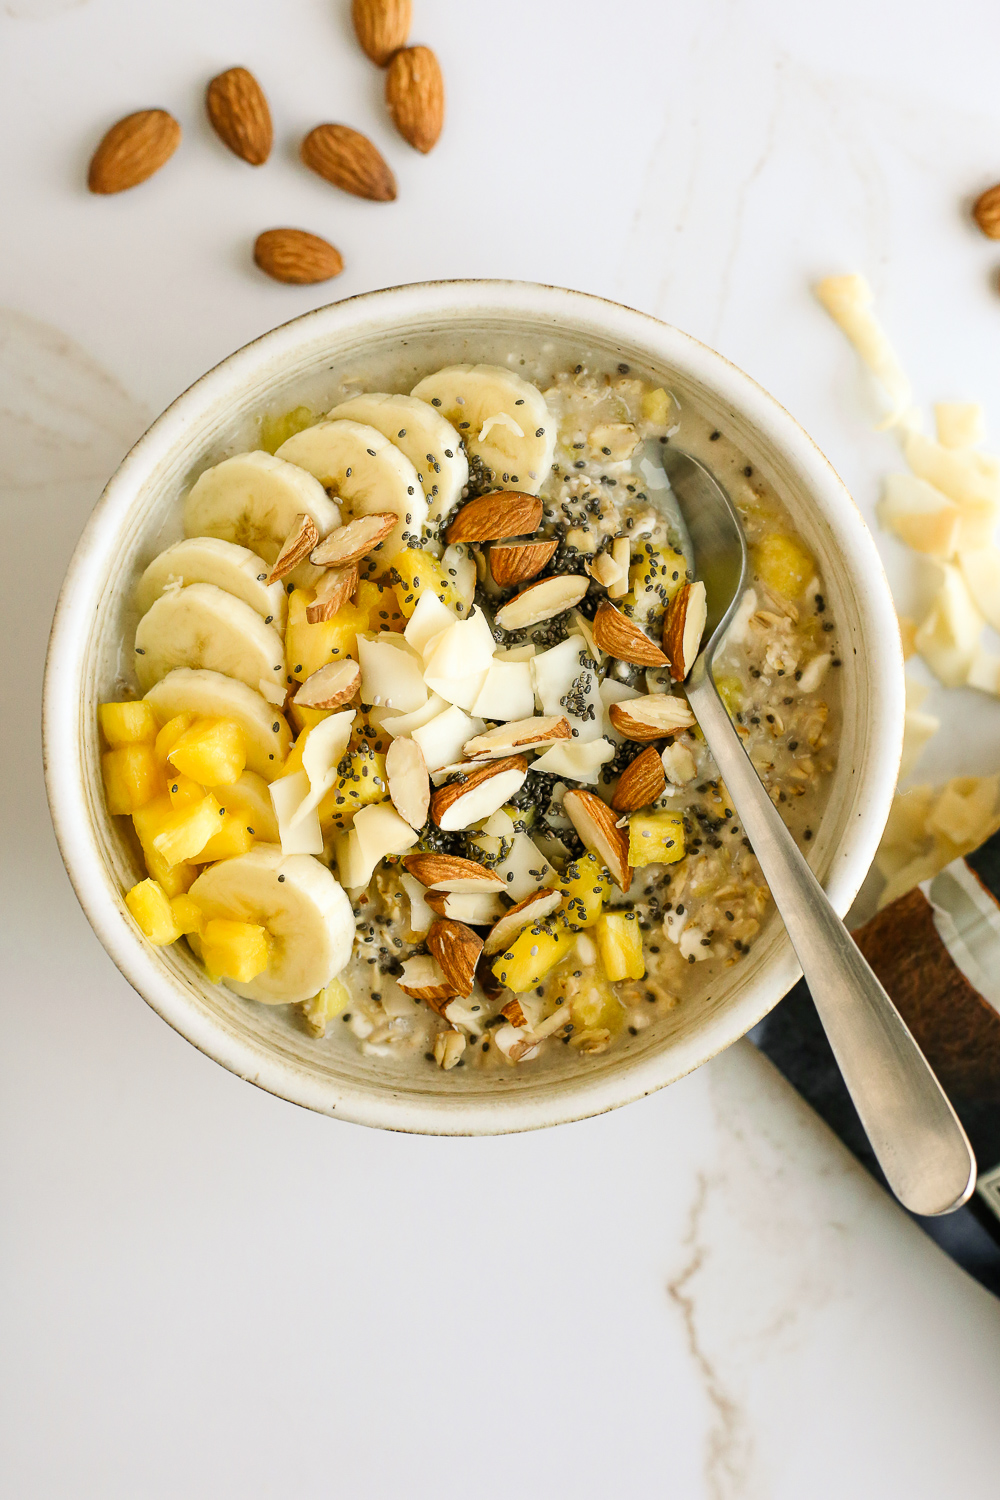 Bowl of pineapple banana protein oats with toasted coconut, almonds, and chia seeds